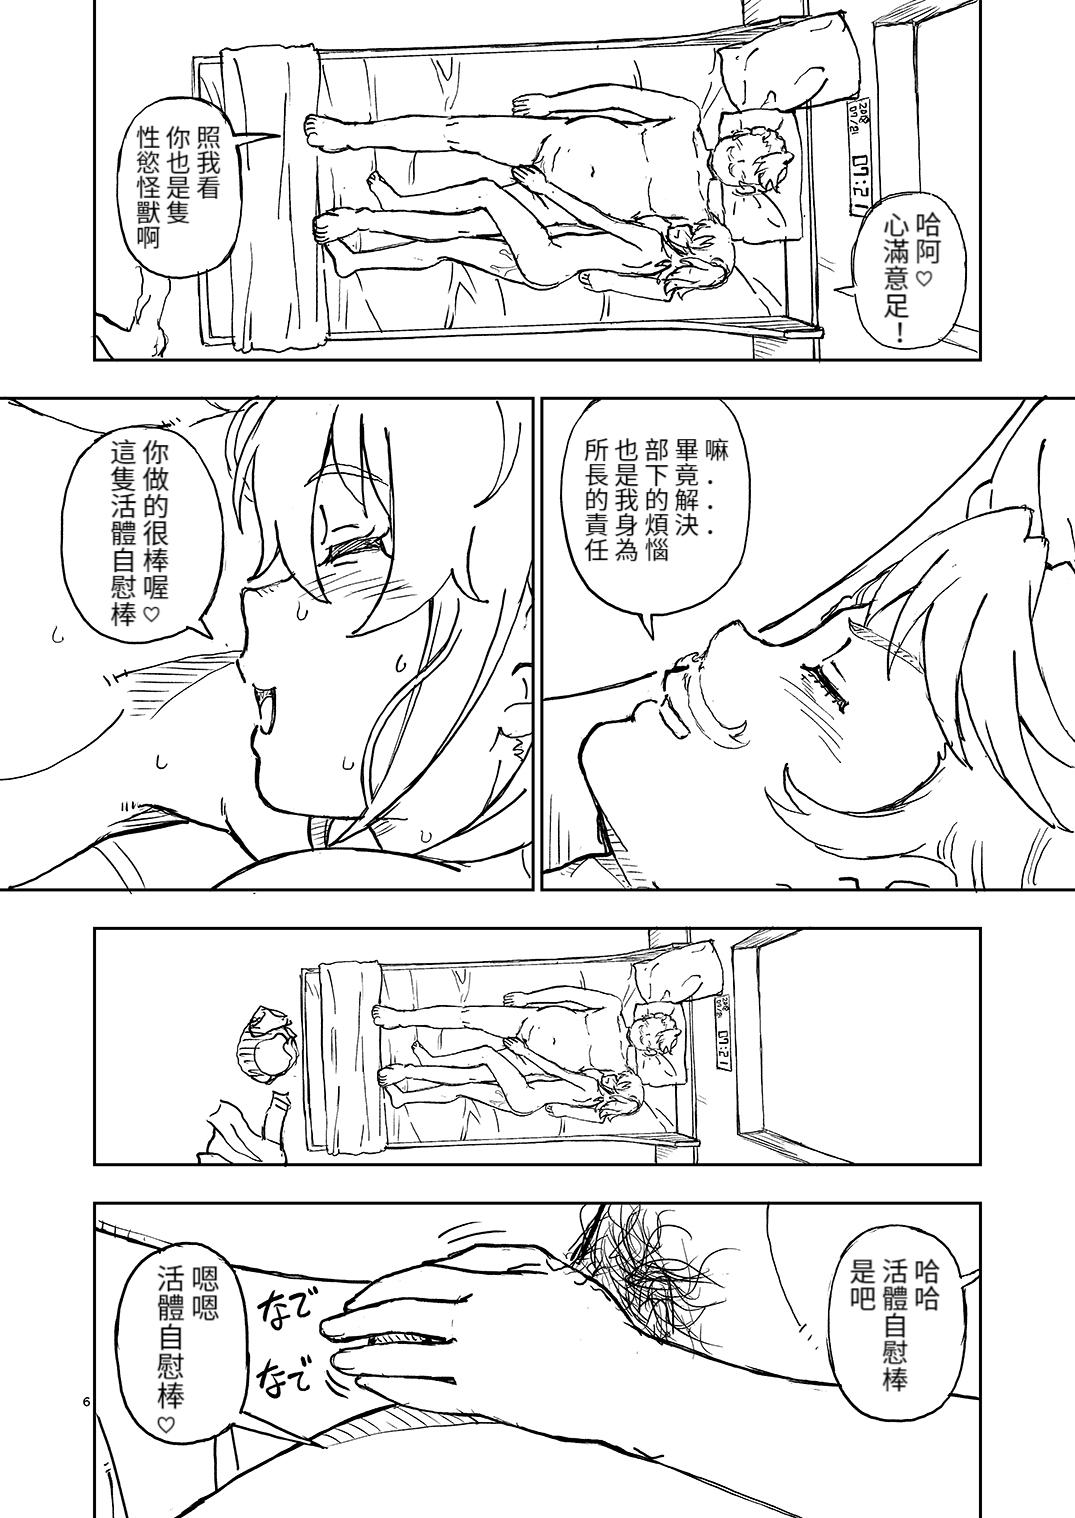 Best Blow Job C96 no Omake - Fate grand order Free Hardcore - Page 6